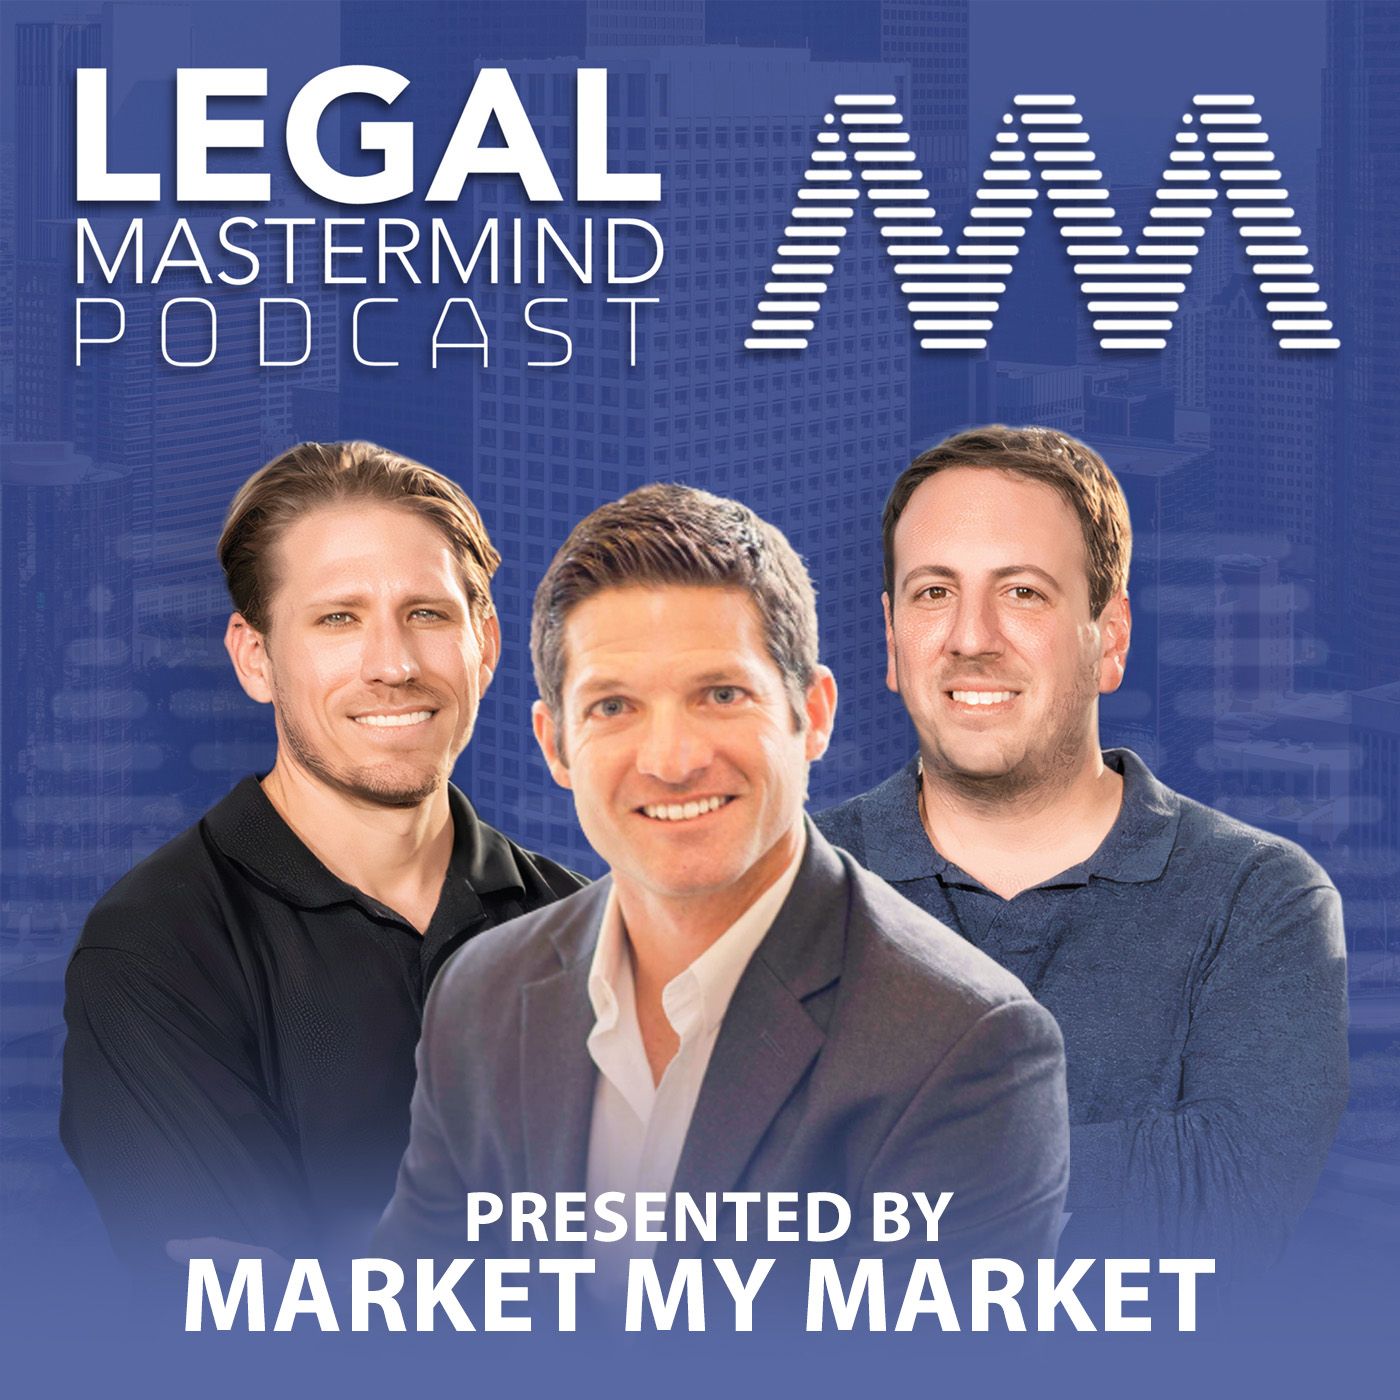 Legal Mastermind Podcast – Presented By Market My Market